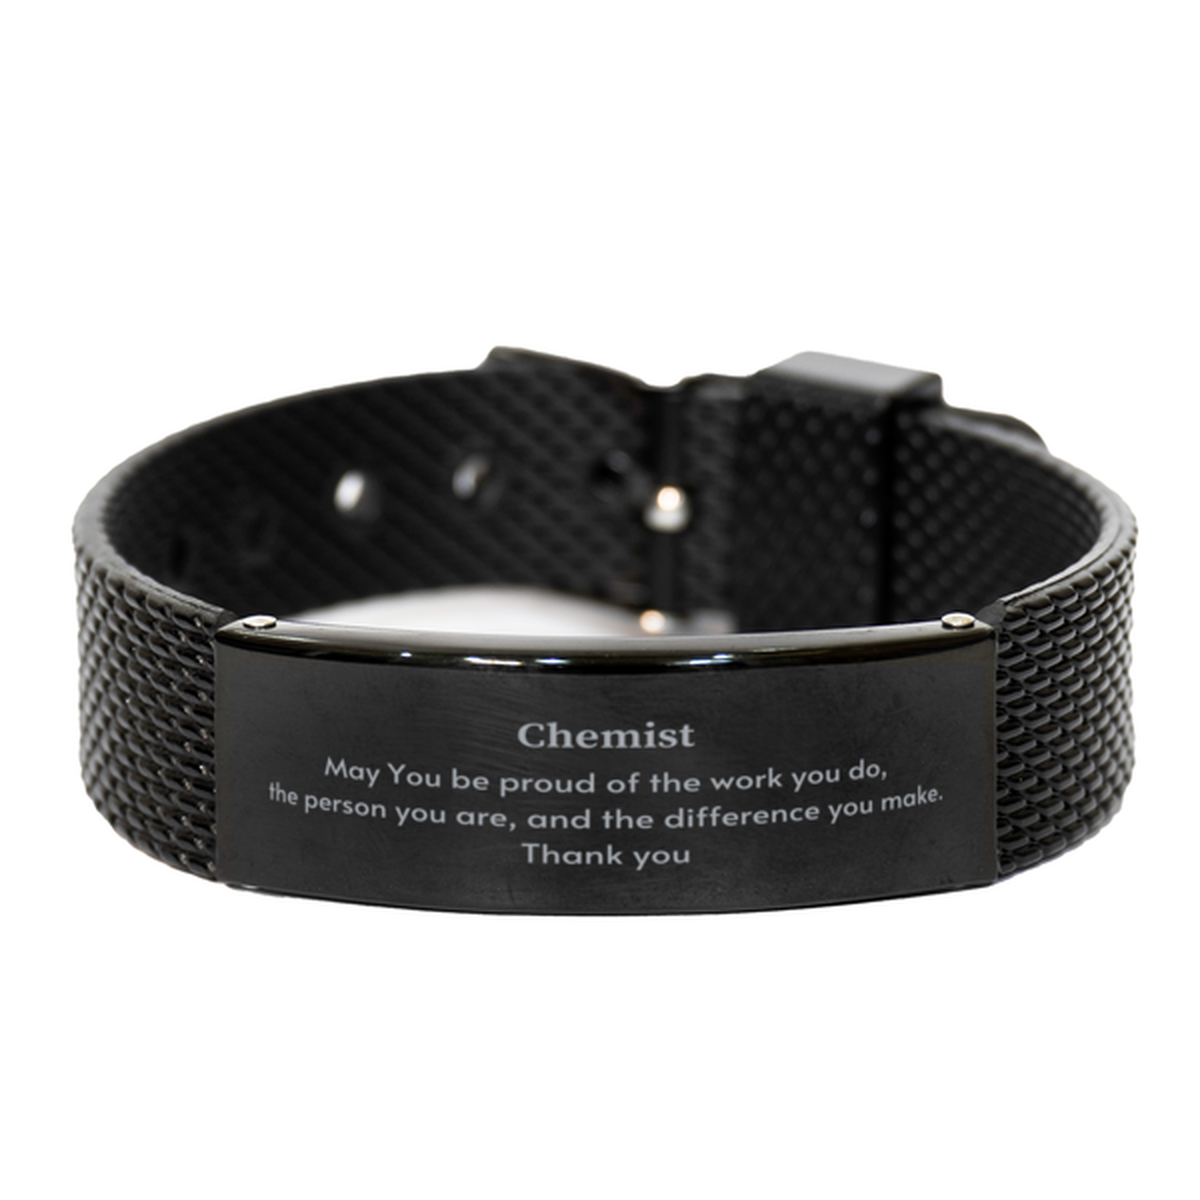 Heartwarming Black Shark Mesh Bracelet Retirement Coworkers Gifts for Chemist, Chemist May You be proud of the work you do, the person you are Gifts for Boss Men Women Friends